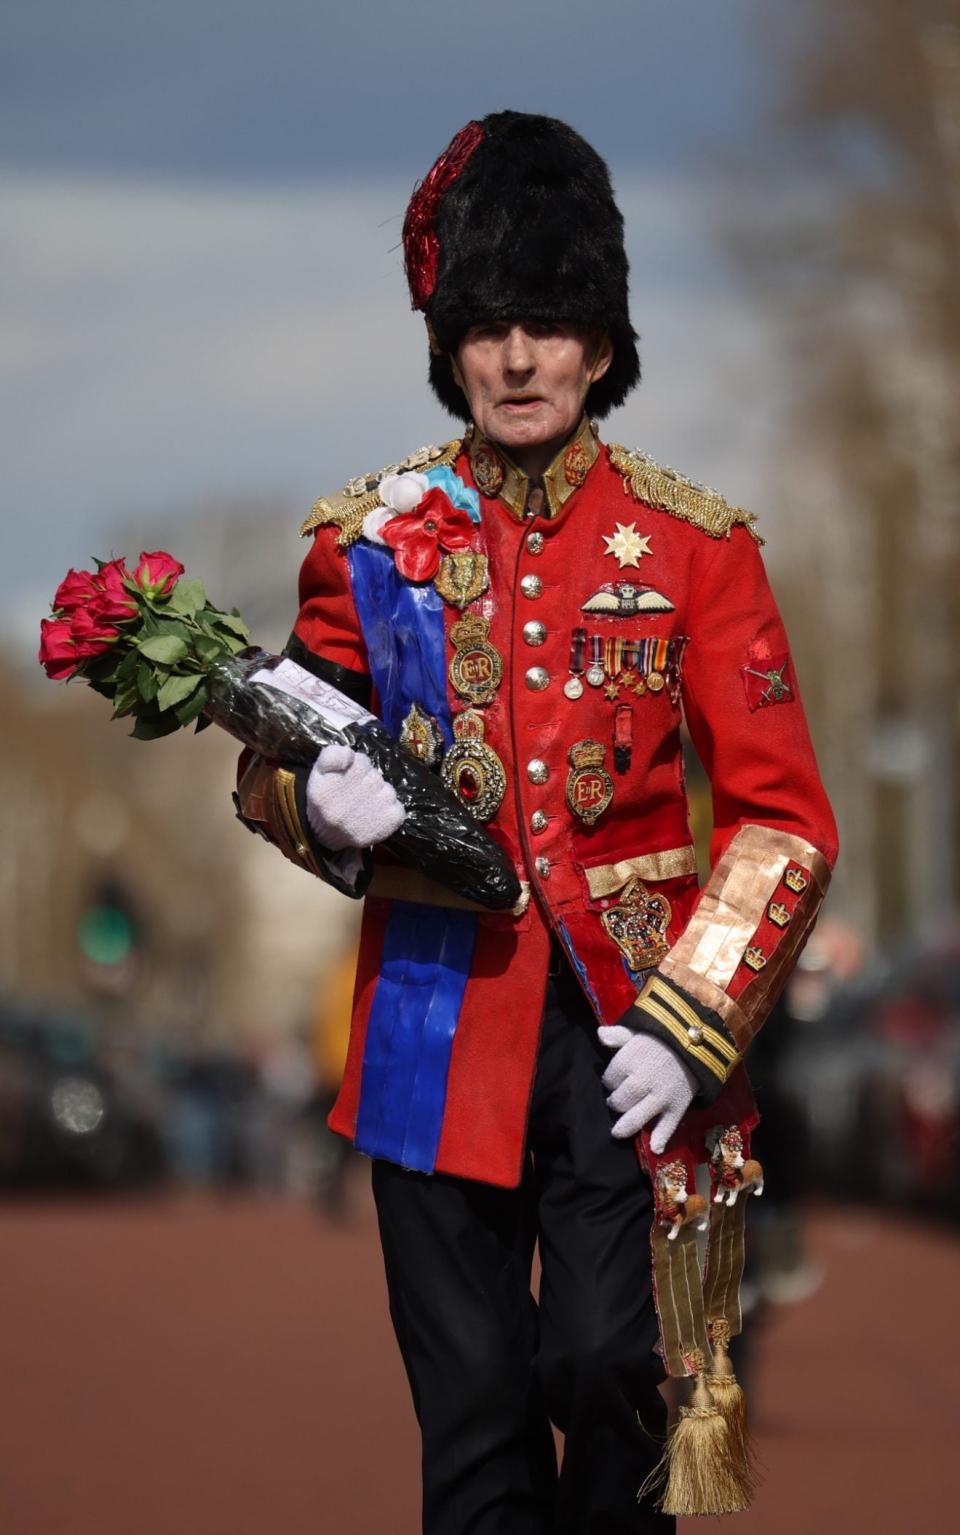 An elderly member of the public wearing an outfit in the style of a vintage ceremonial military uniform carries a floral tribute outside Buckingham Palace  - Dan Kitwood/ Getty Images 